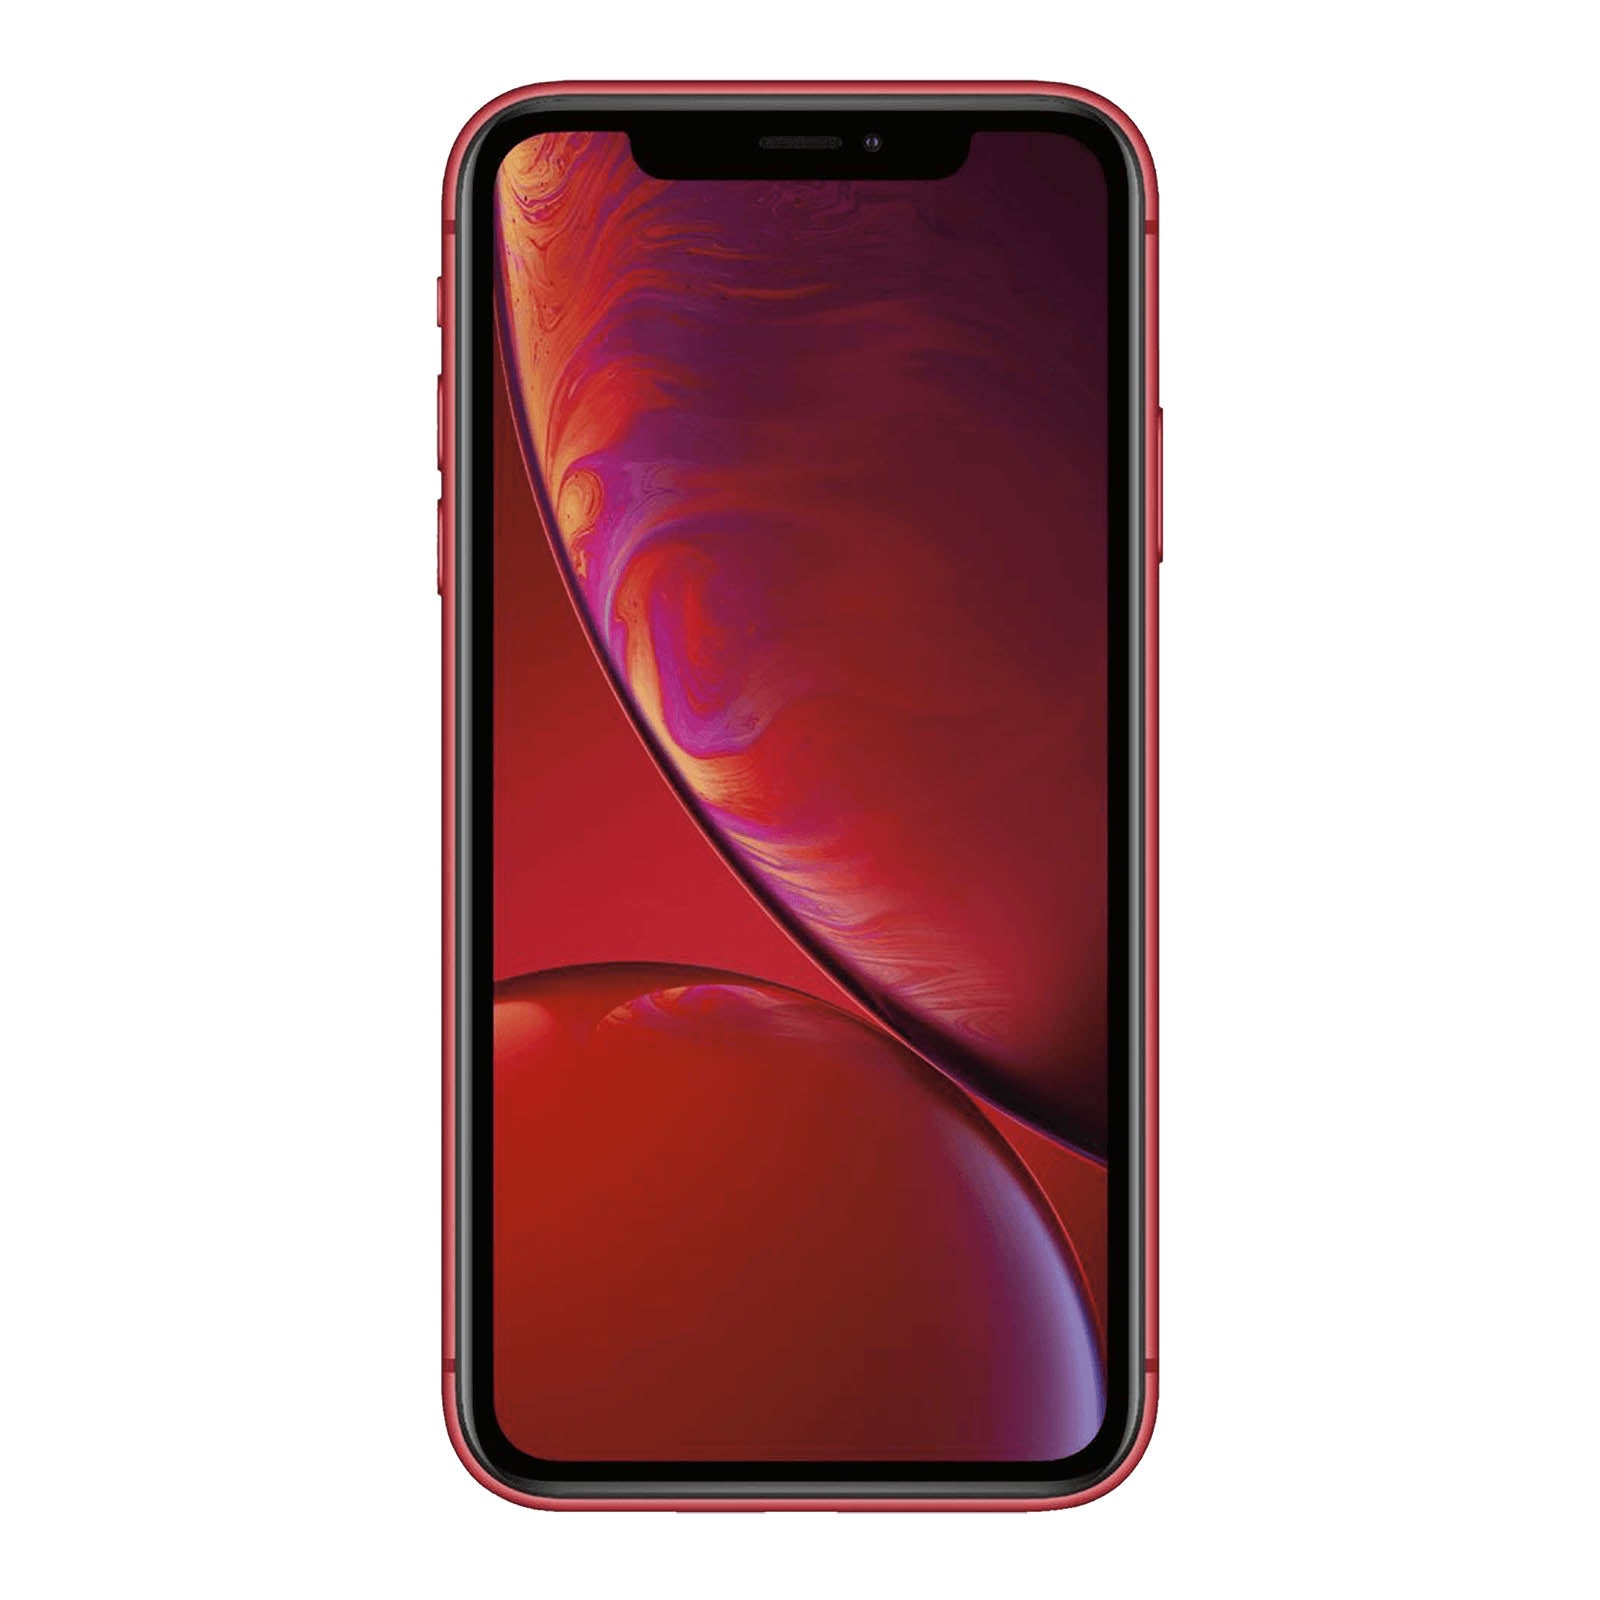 Apple iPhone XR 64GB Product Red Good - T-Mobile